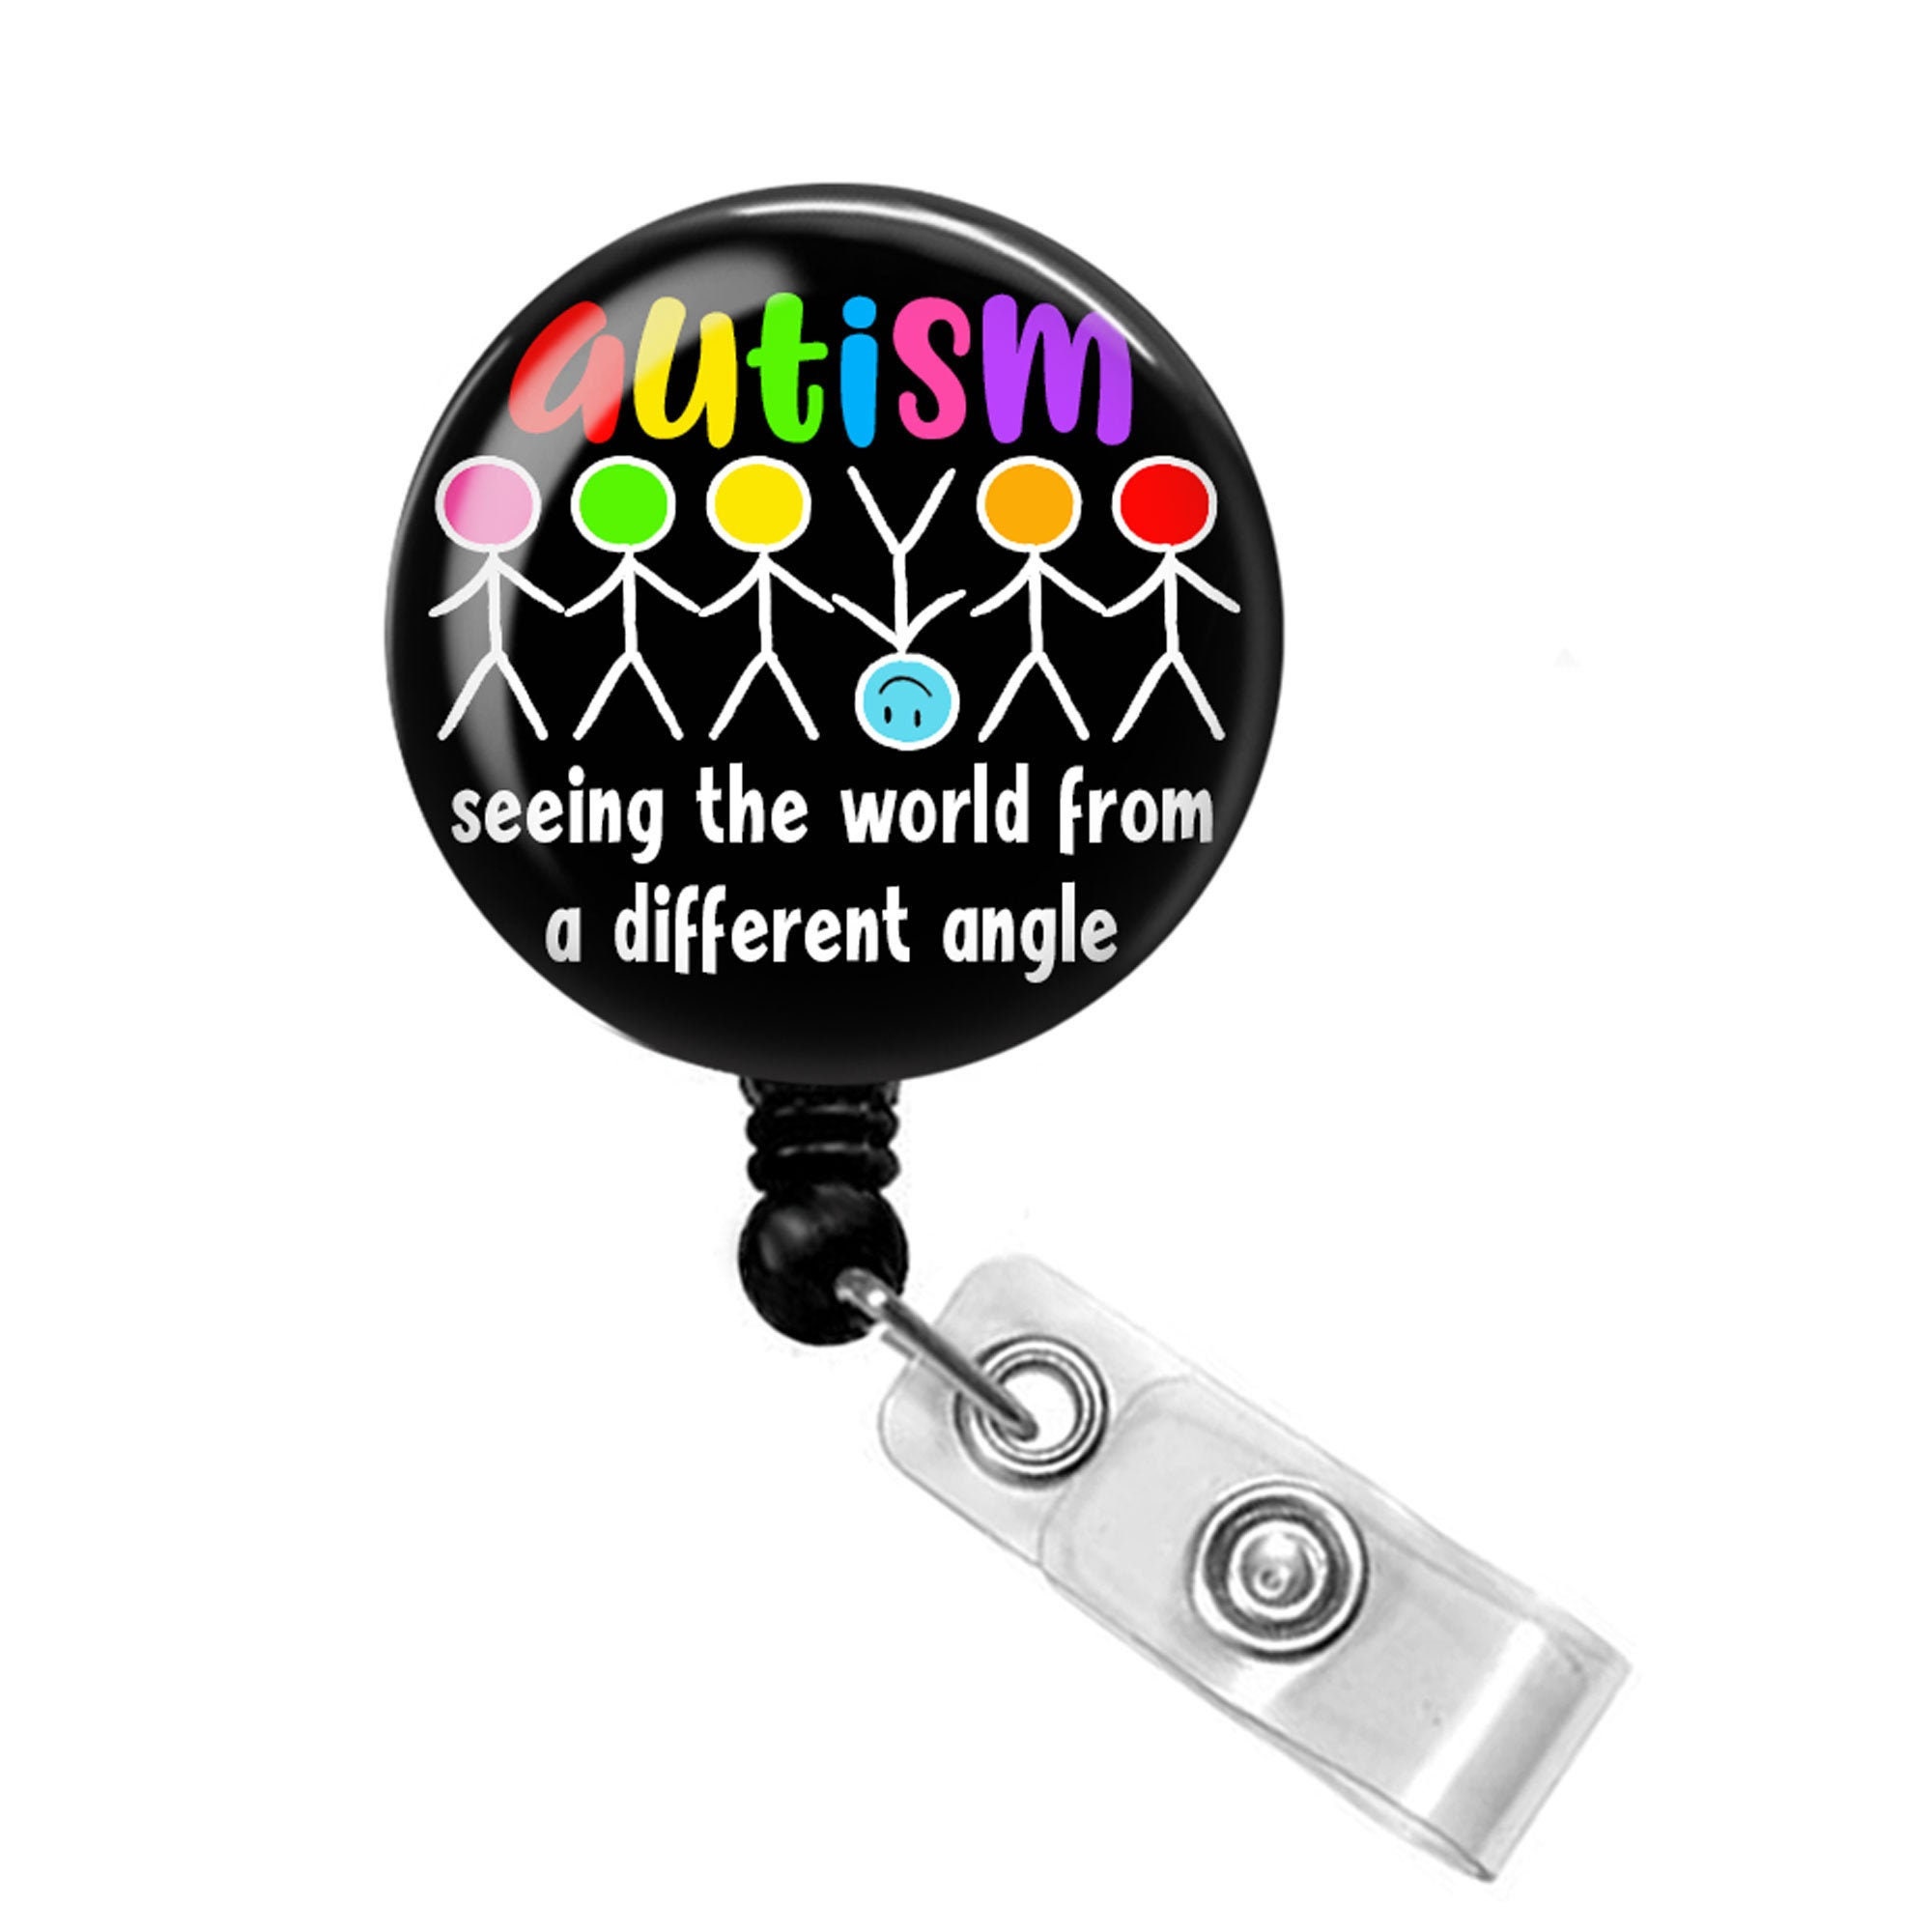 Autism Badge Reel - Autism Badge Holder - Autism Awareness - Autism Badge  Buddy - Seeing the World From a Different Angle